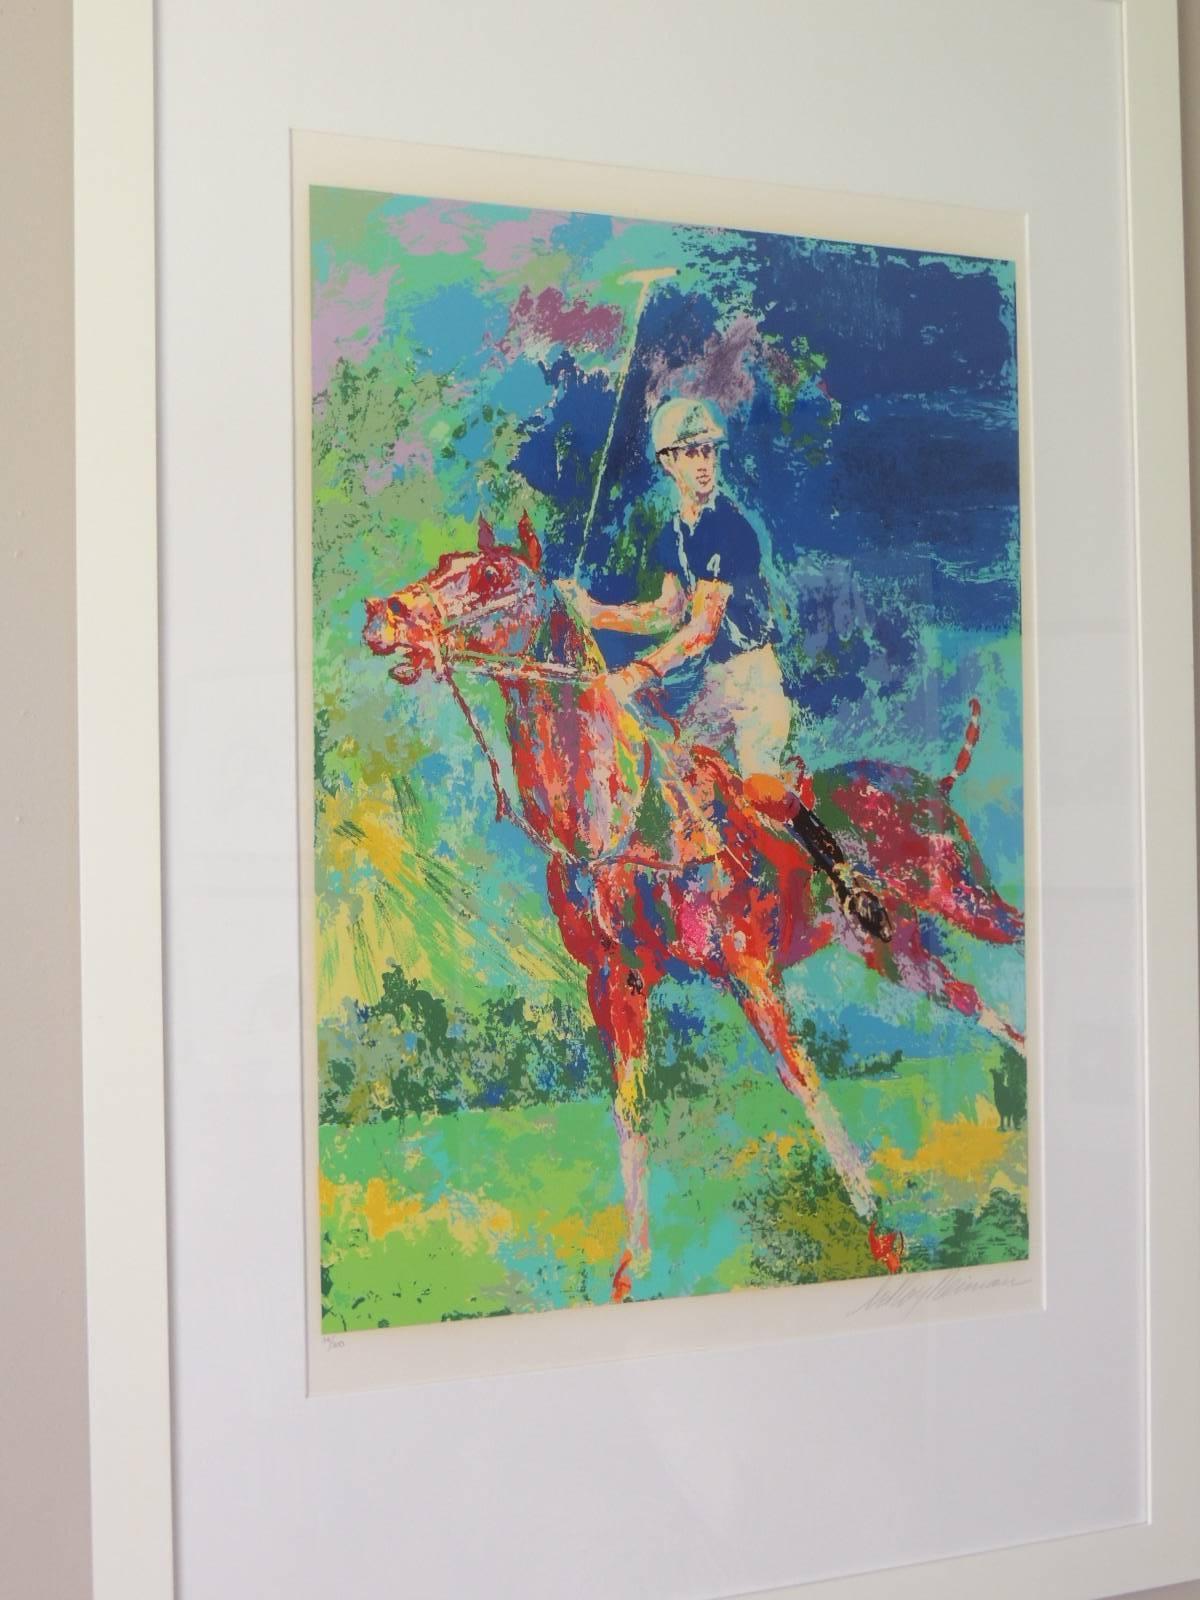 Artist LeRoy Neiman Prince Charles at Windsor
American Artist
Medium: Serigraph, signed and numbered in pencil.
Series: 34 of 300
Art size: 24 x 36
Finished: Framed with white wood custom frame, white linen textured mat and UB plexiglass. Framed